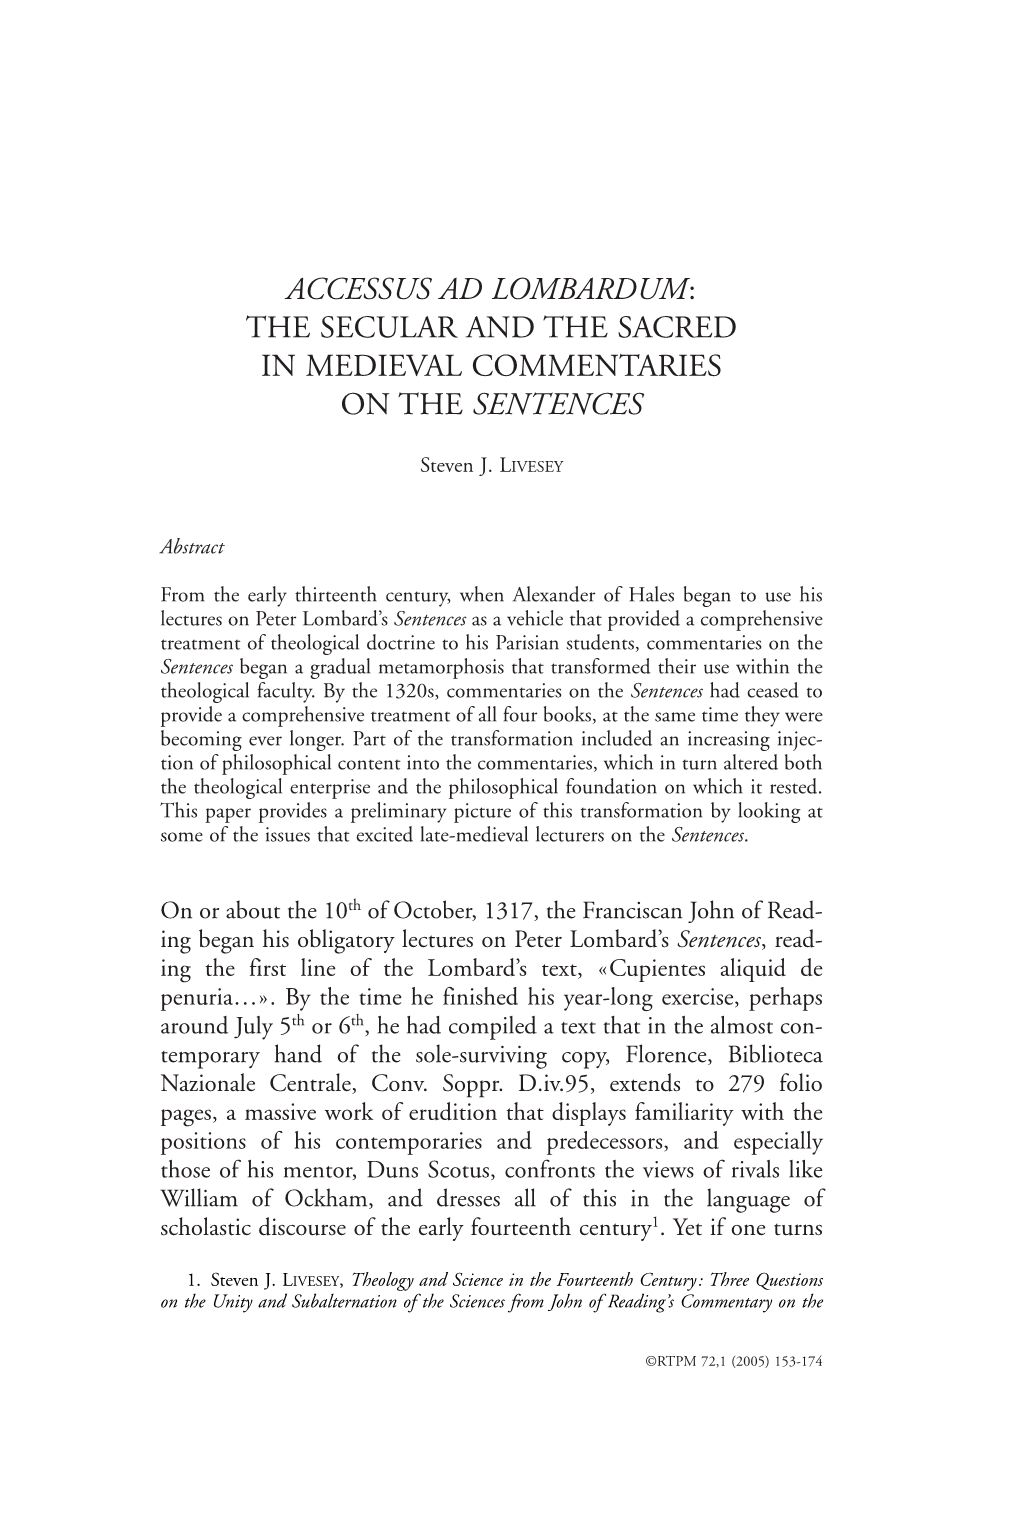 Accessus Ad Lombardum: the Secular and the Sacred in Medieval Commentaries on the Sentences